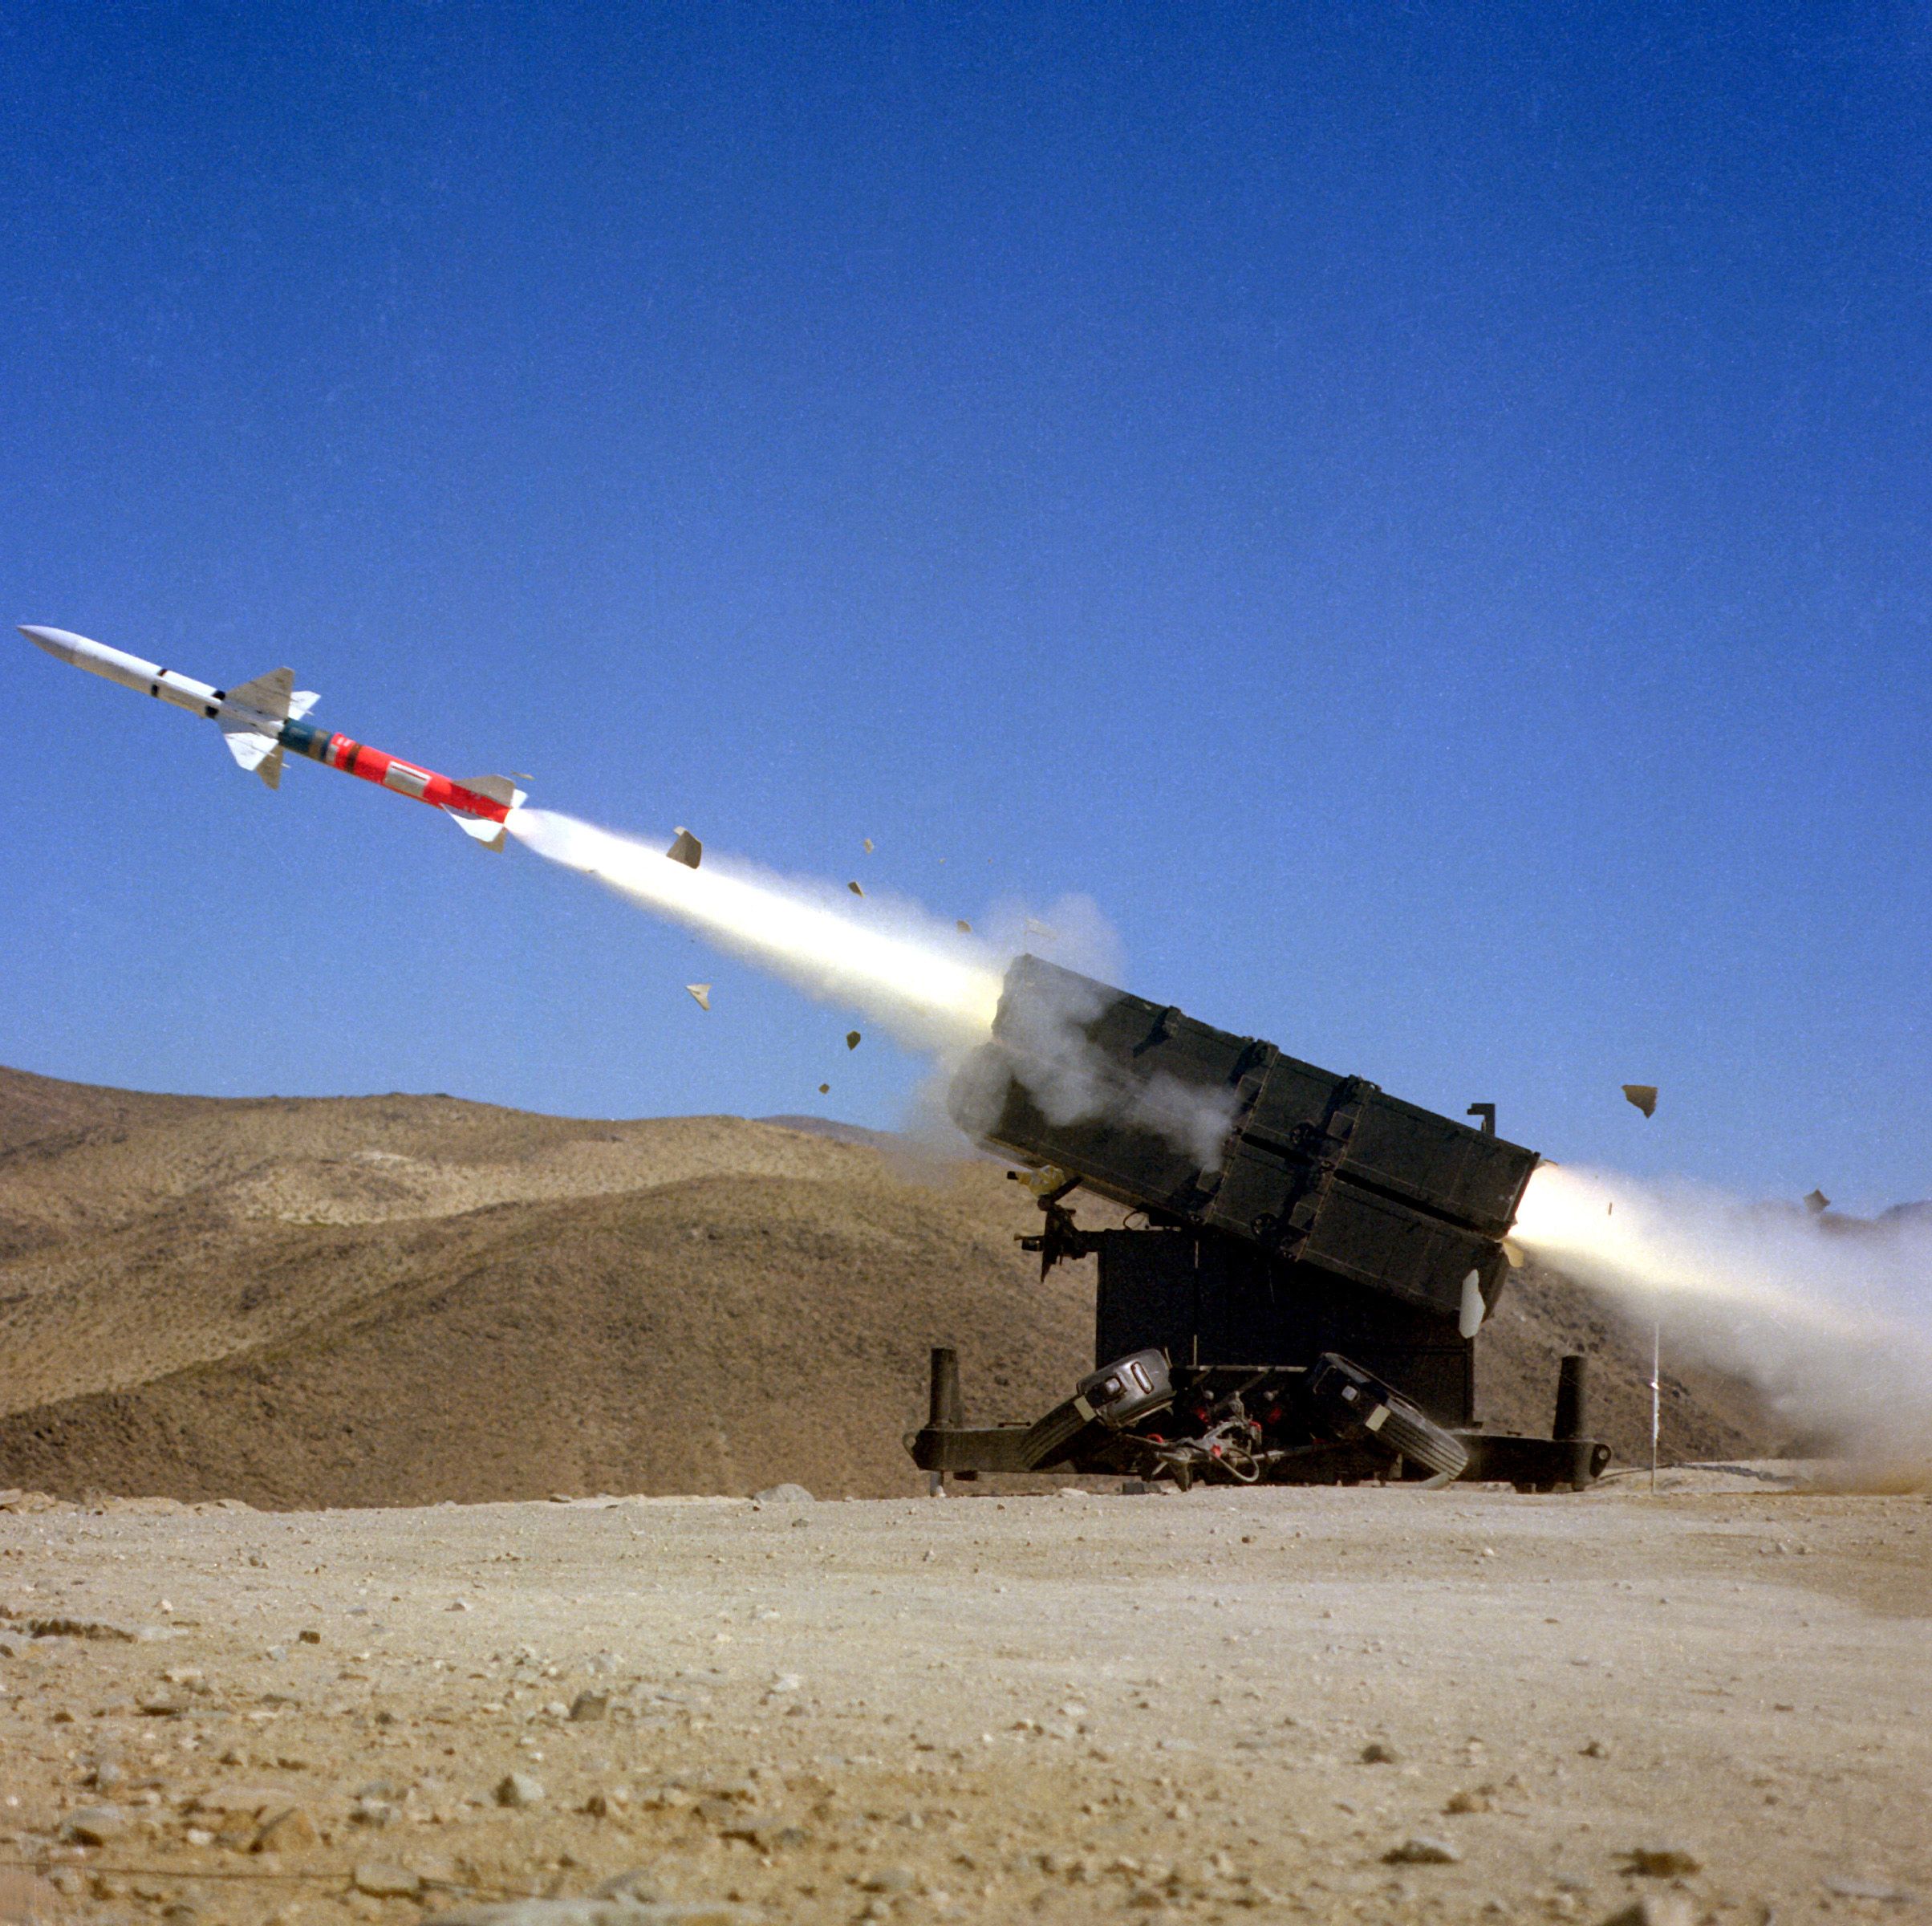 A Lack of Experience Isn't Stopping the U.S. From Giving Ukraine Sea Sparrow Missiles